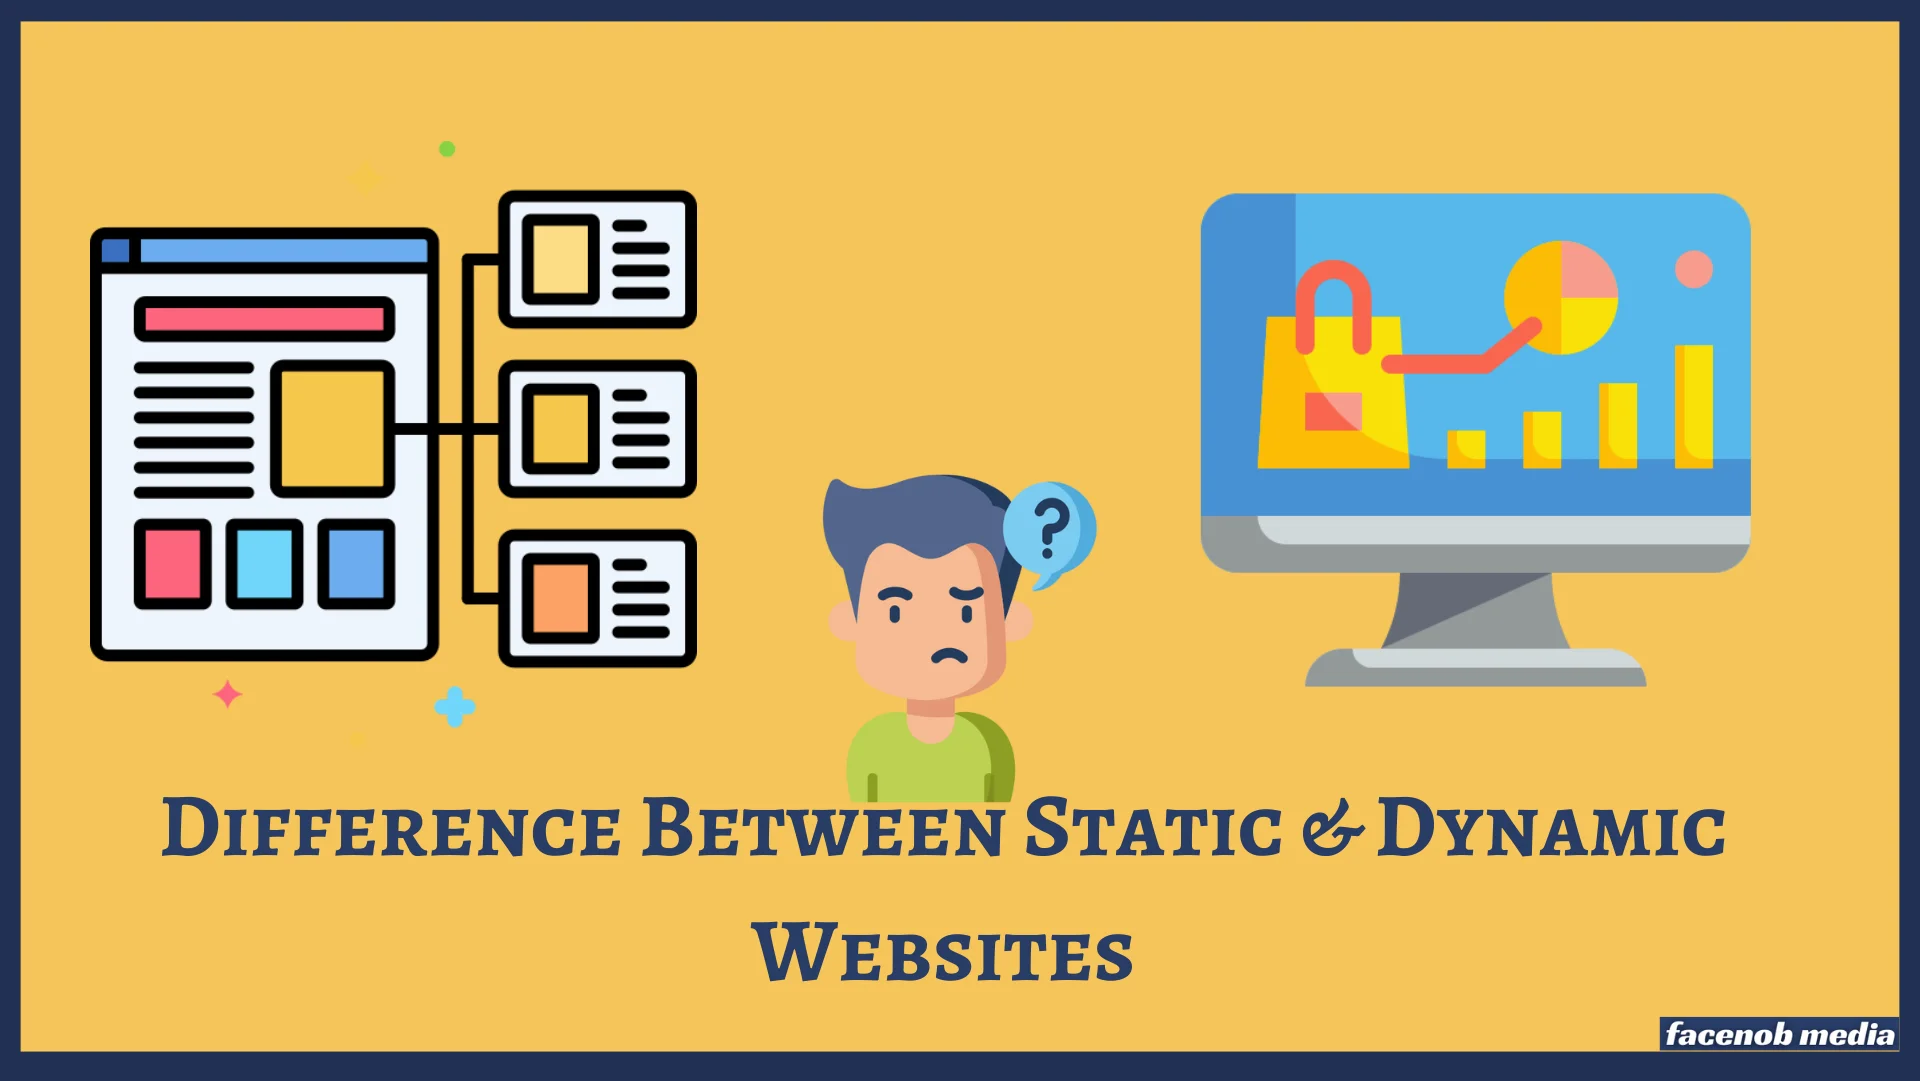 Difference Between Static & Dynamic Websites